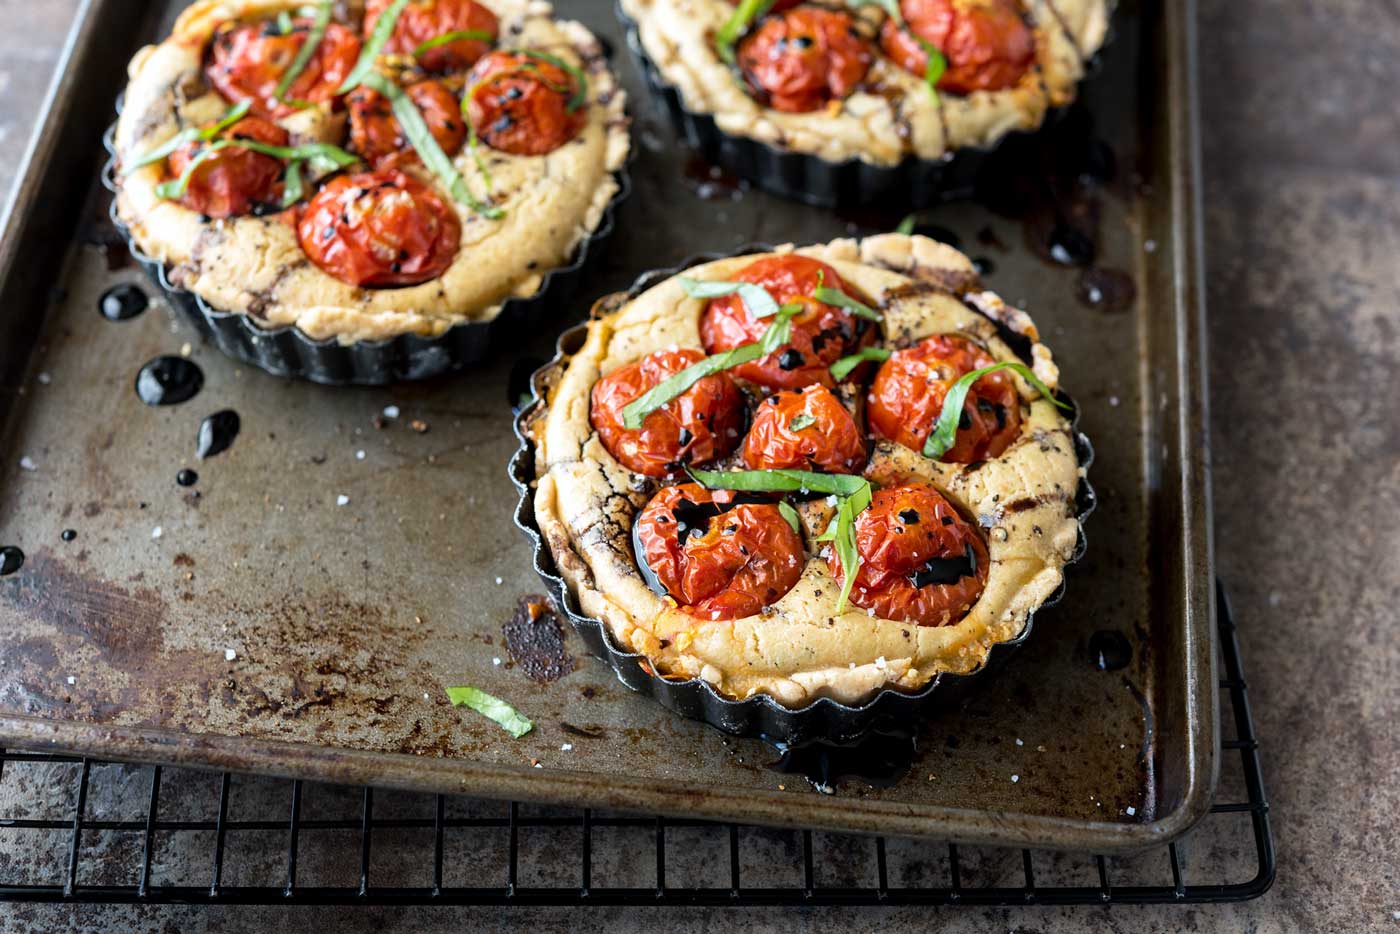 Creamy Tomato Basil Tartlets! Summer is coming to an end, so use up some of those tasty, garden-fresh tomatoes in these delicious, gluten-free, soy-free tartlets! #vegan #veganyackattack